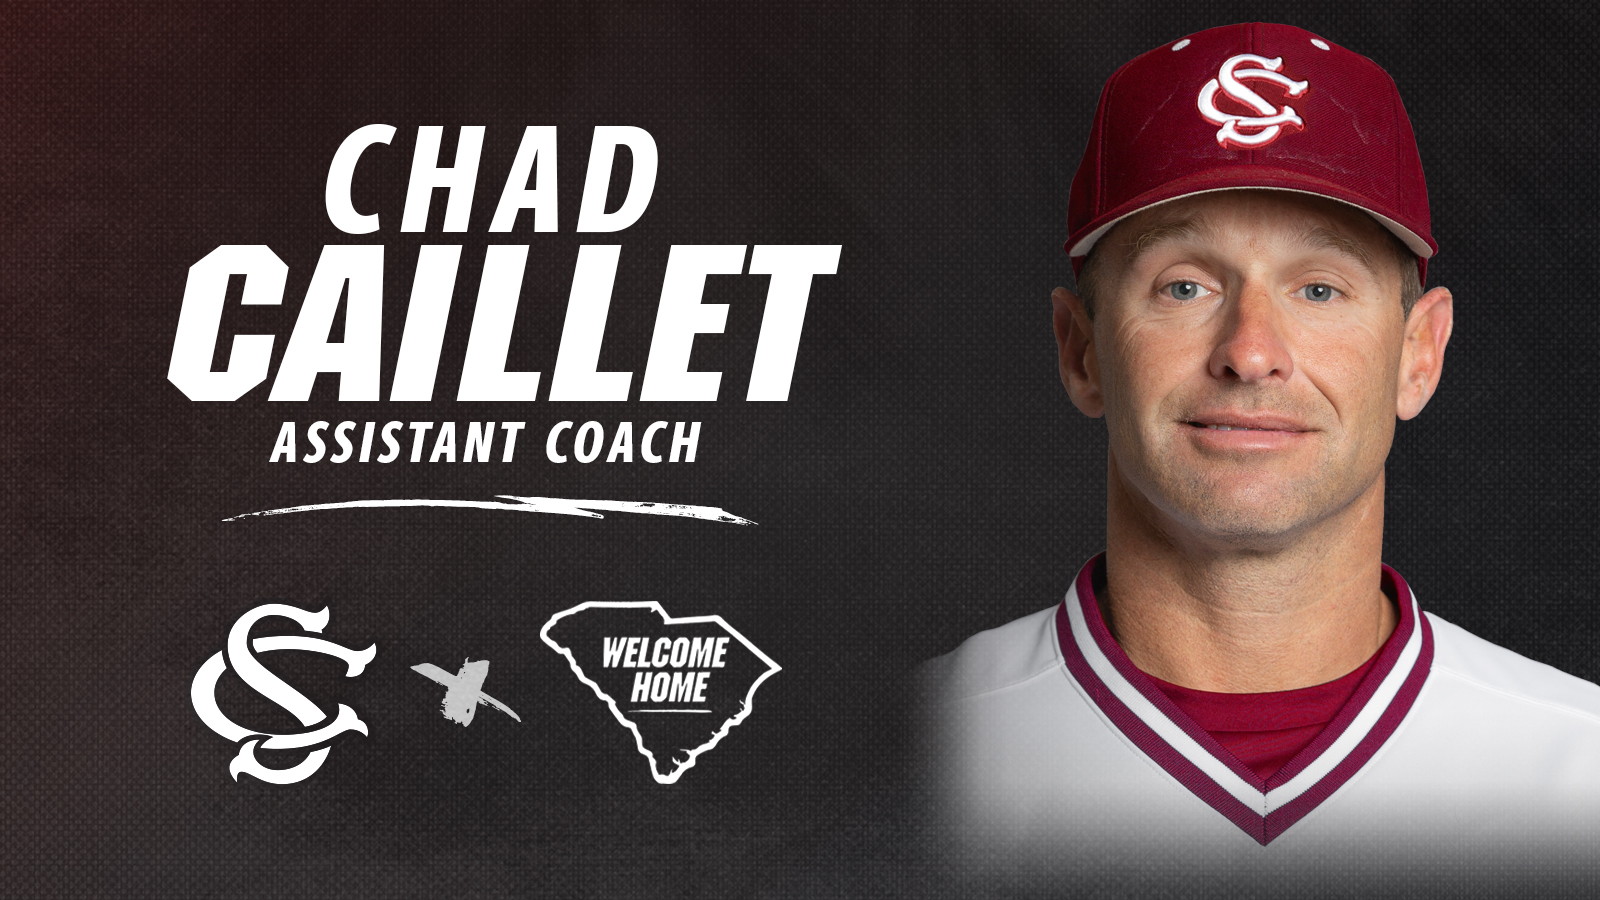 Baseball Announces Hiring of Chad Caillet as Assistant Coach/Recruiting Coordinator